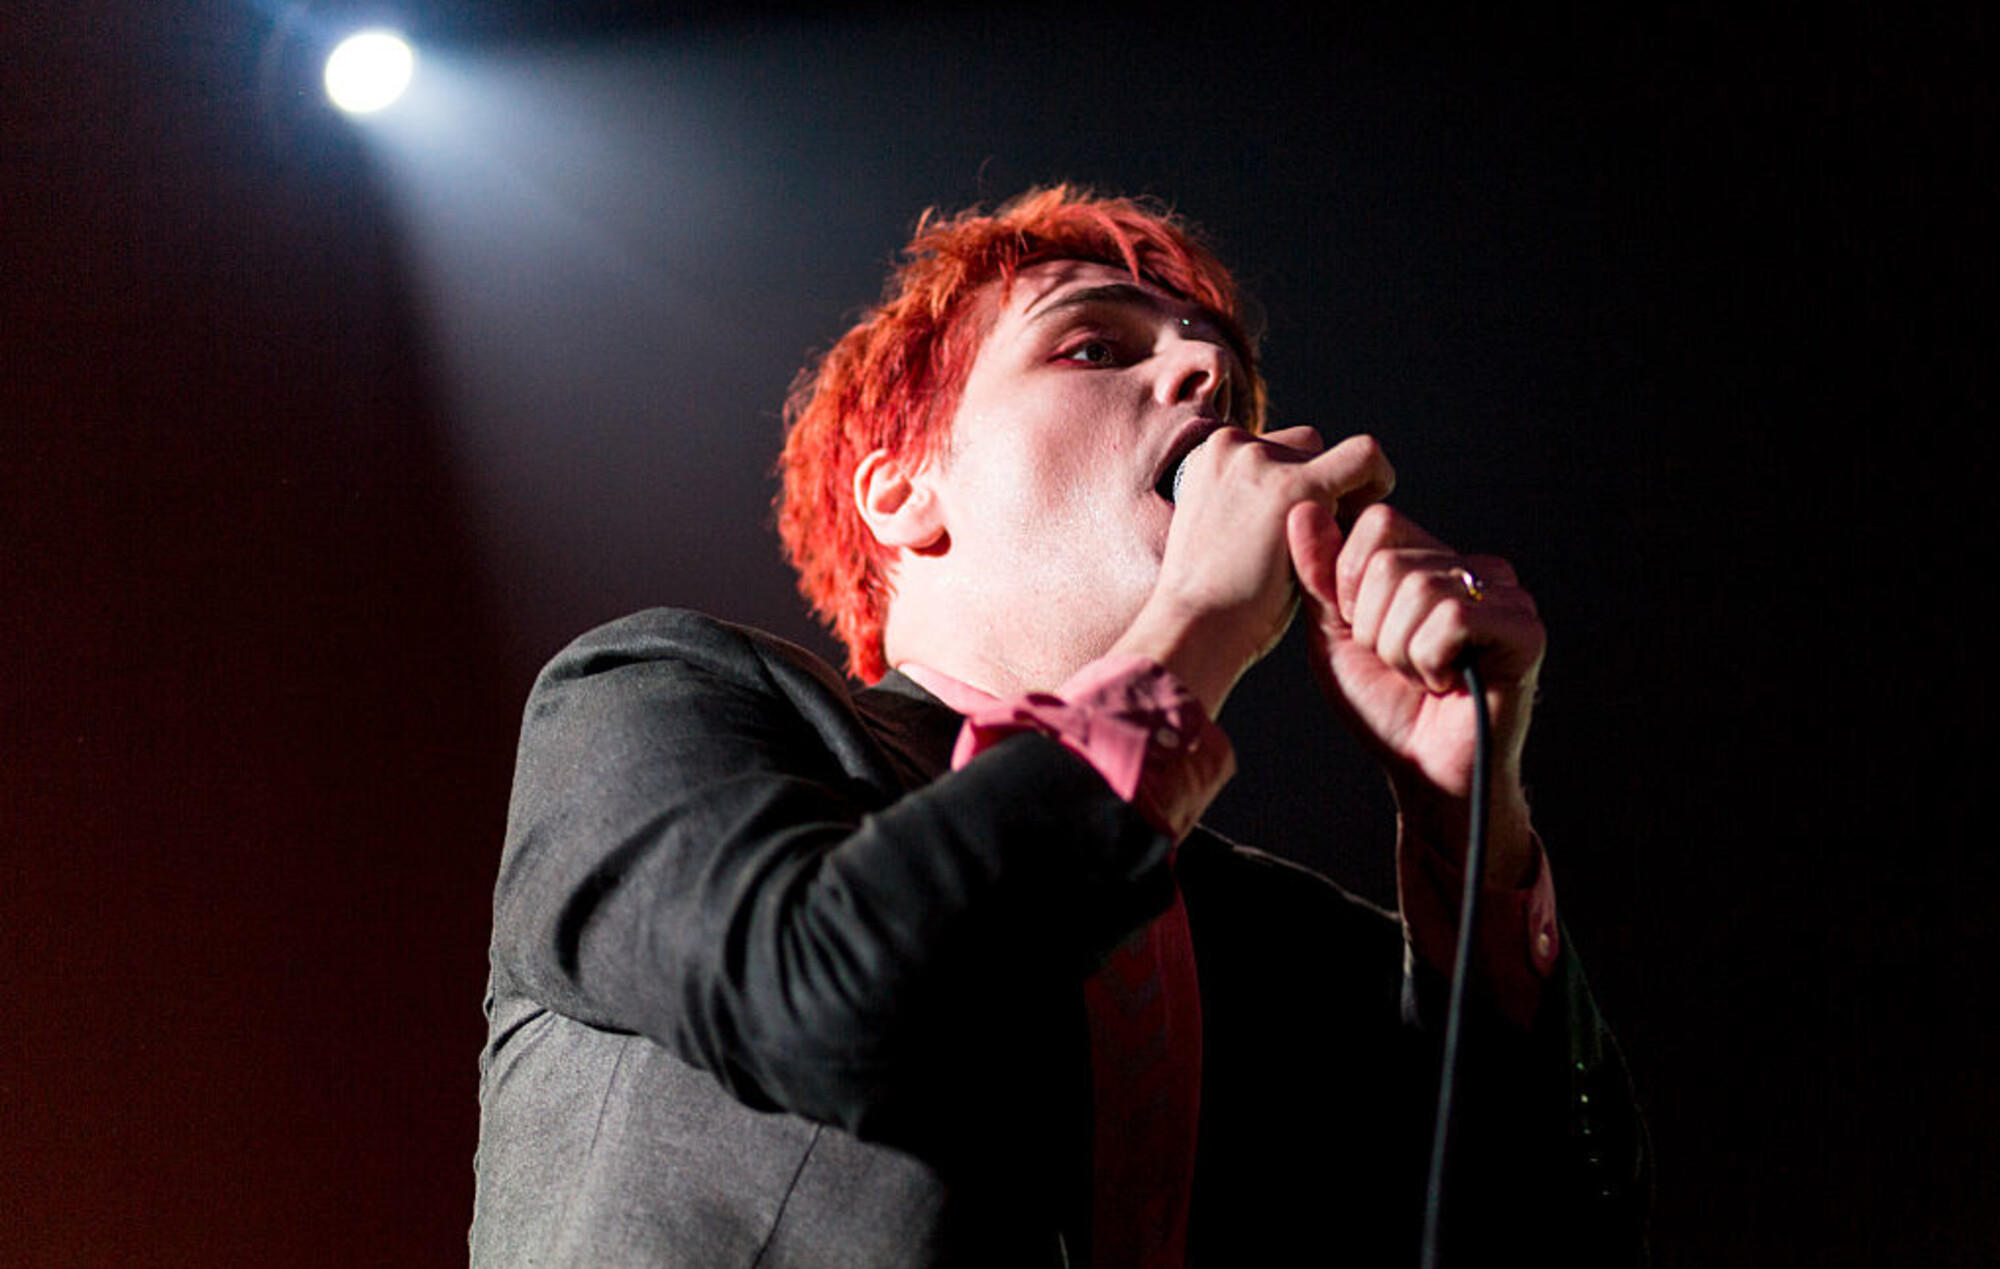 Gerard Way: My Chemical Romance, The co-founder of DC Comics' Young Animal imprint. 2000x1270 HD Wallpaper.